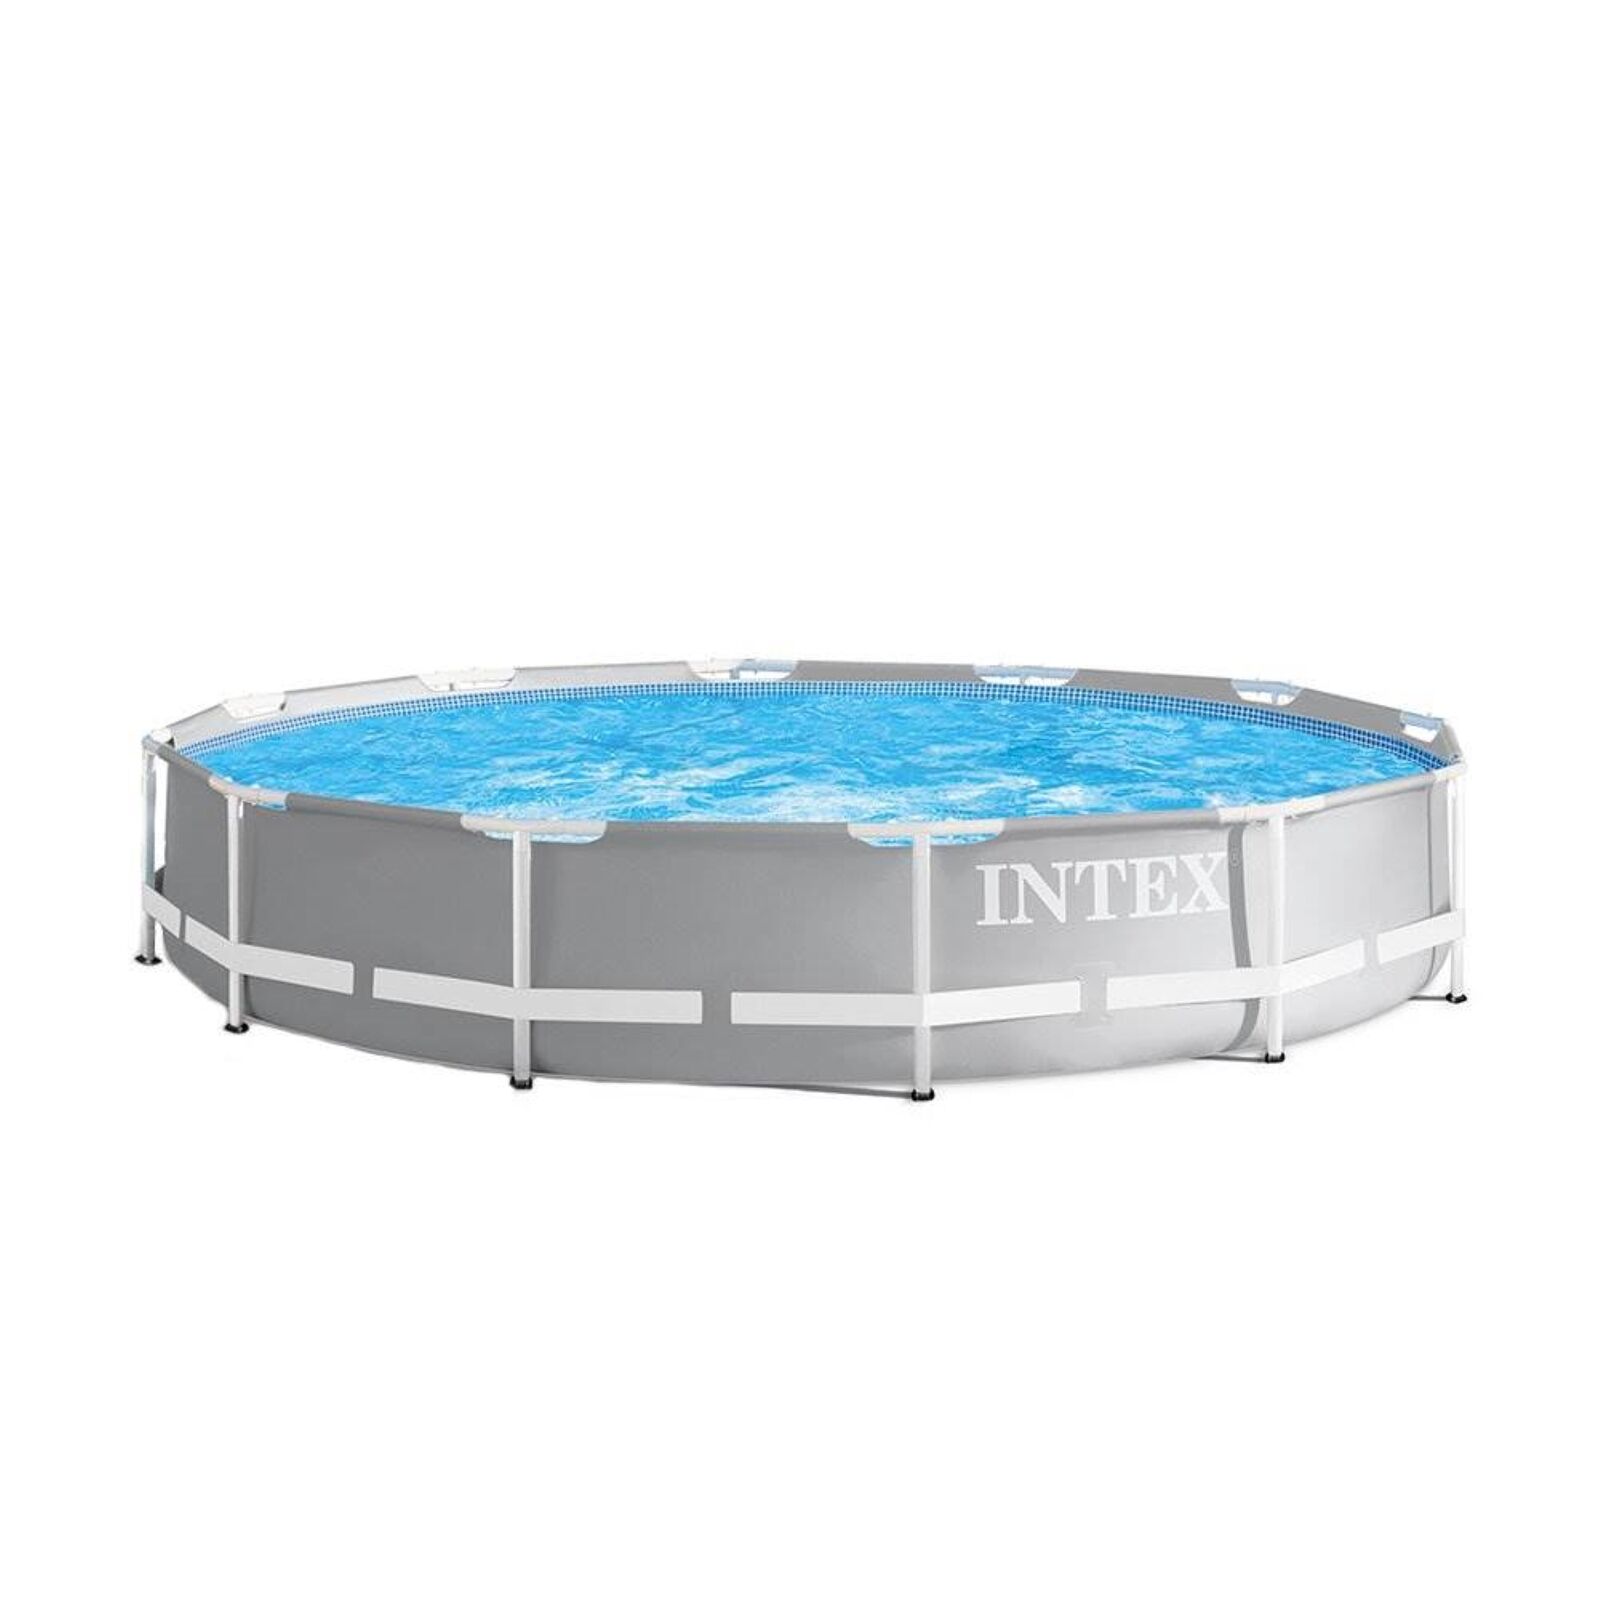 Intex 12ft x 30in Prism Frame Above Ground Round Swimming Pool (No Pump)